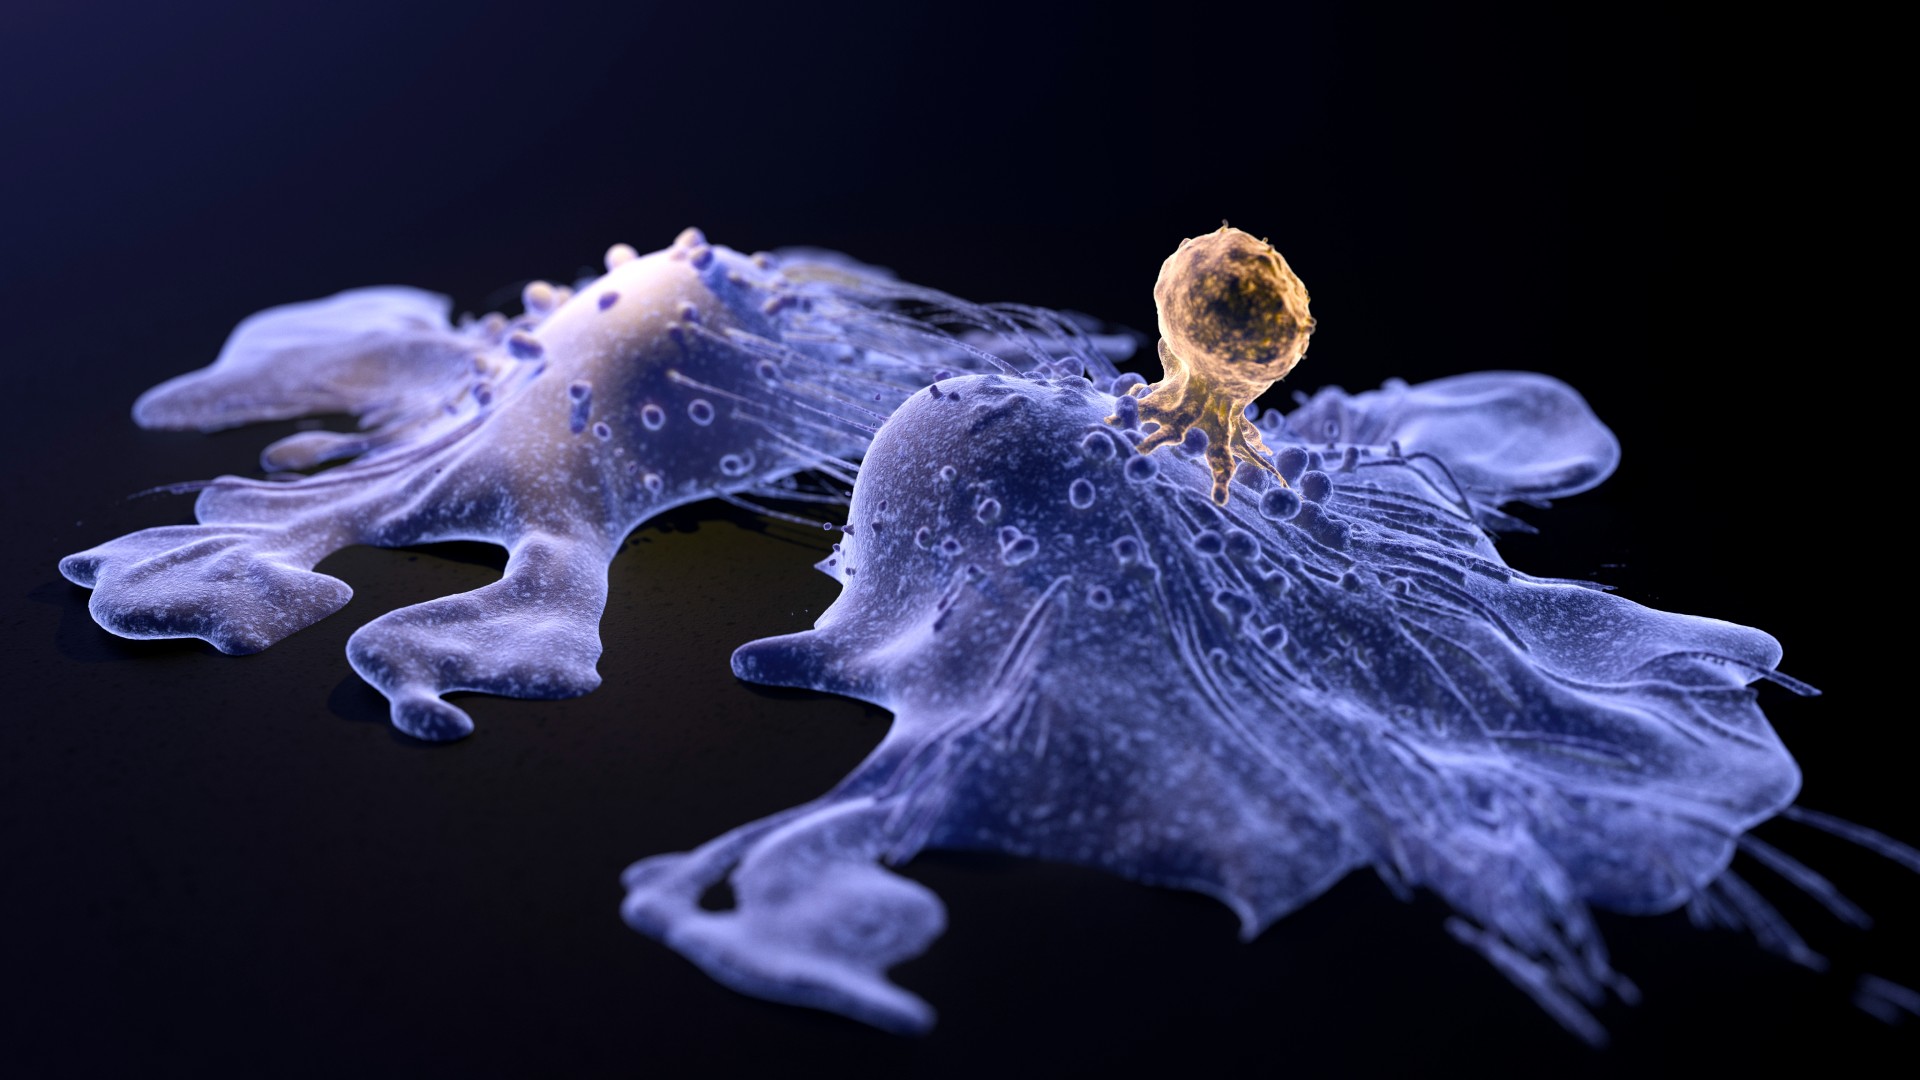 Medical illustration of two cancer cells in purple against a black background. One of the cancer cells (on the right) is being attacked by a T cell, in gold